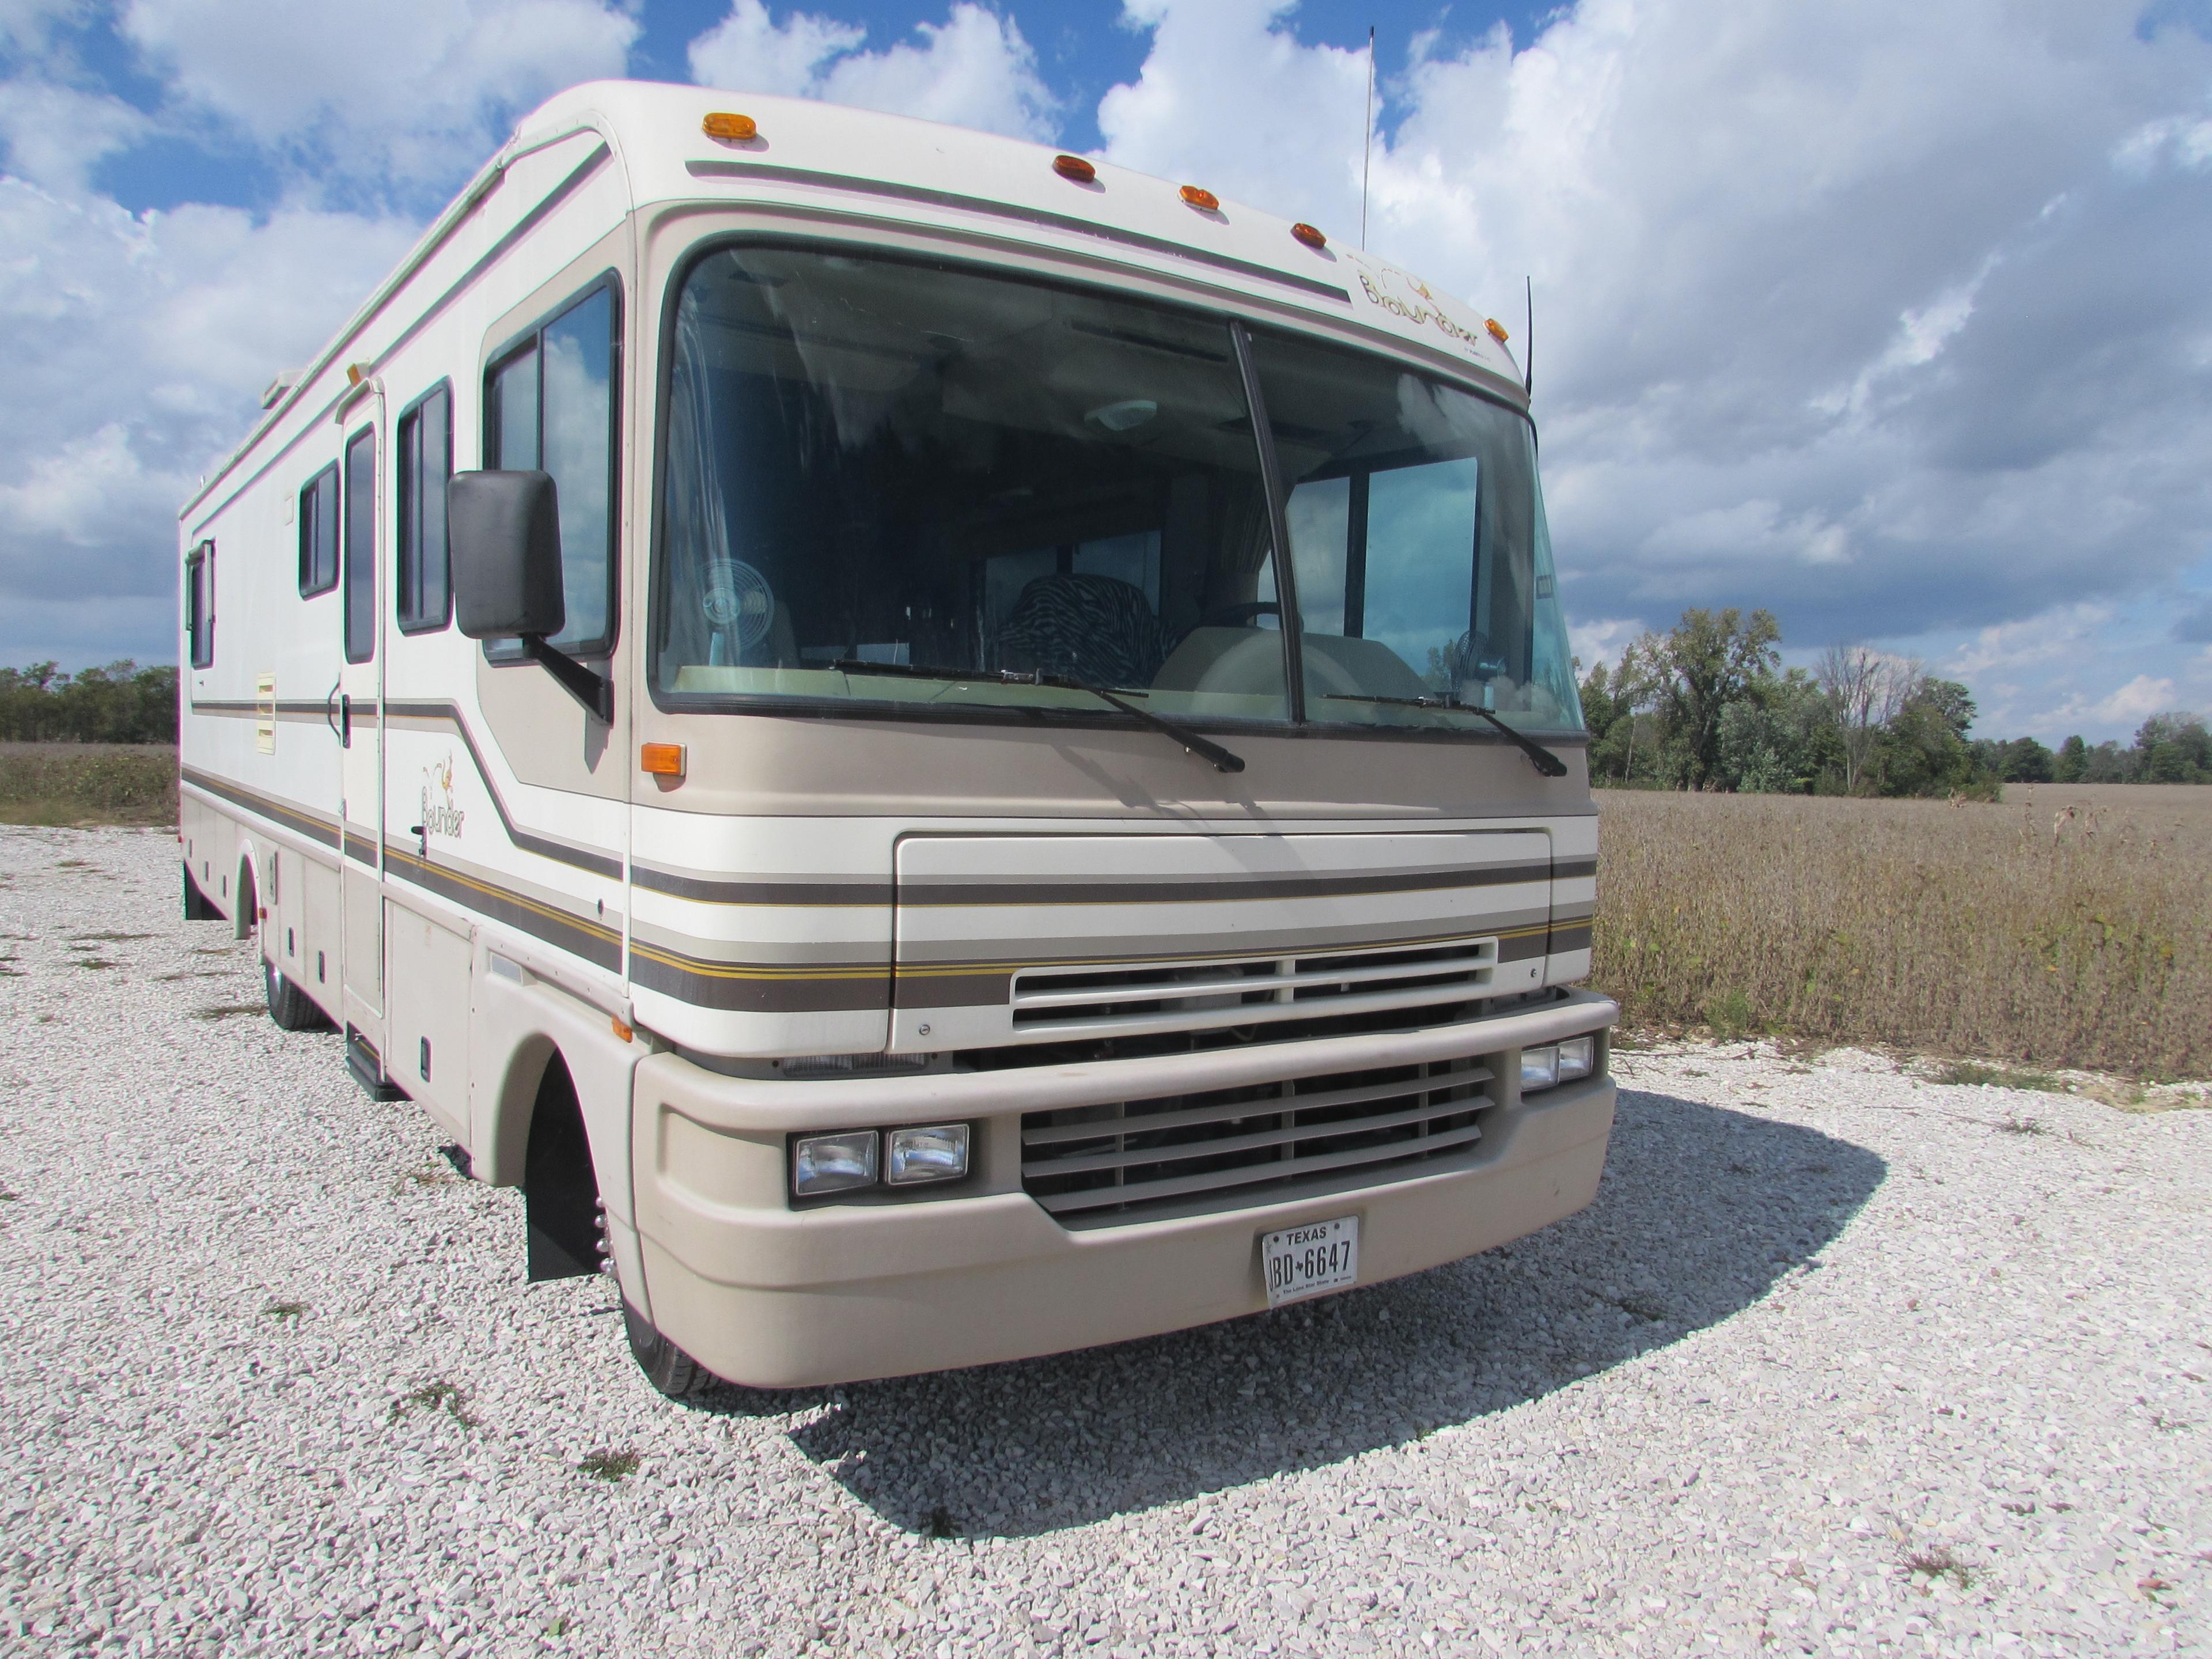 1996 Fords Unknown Motorhome Miles: 50,000